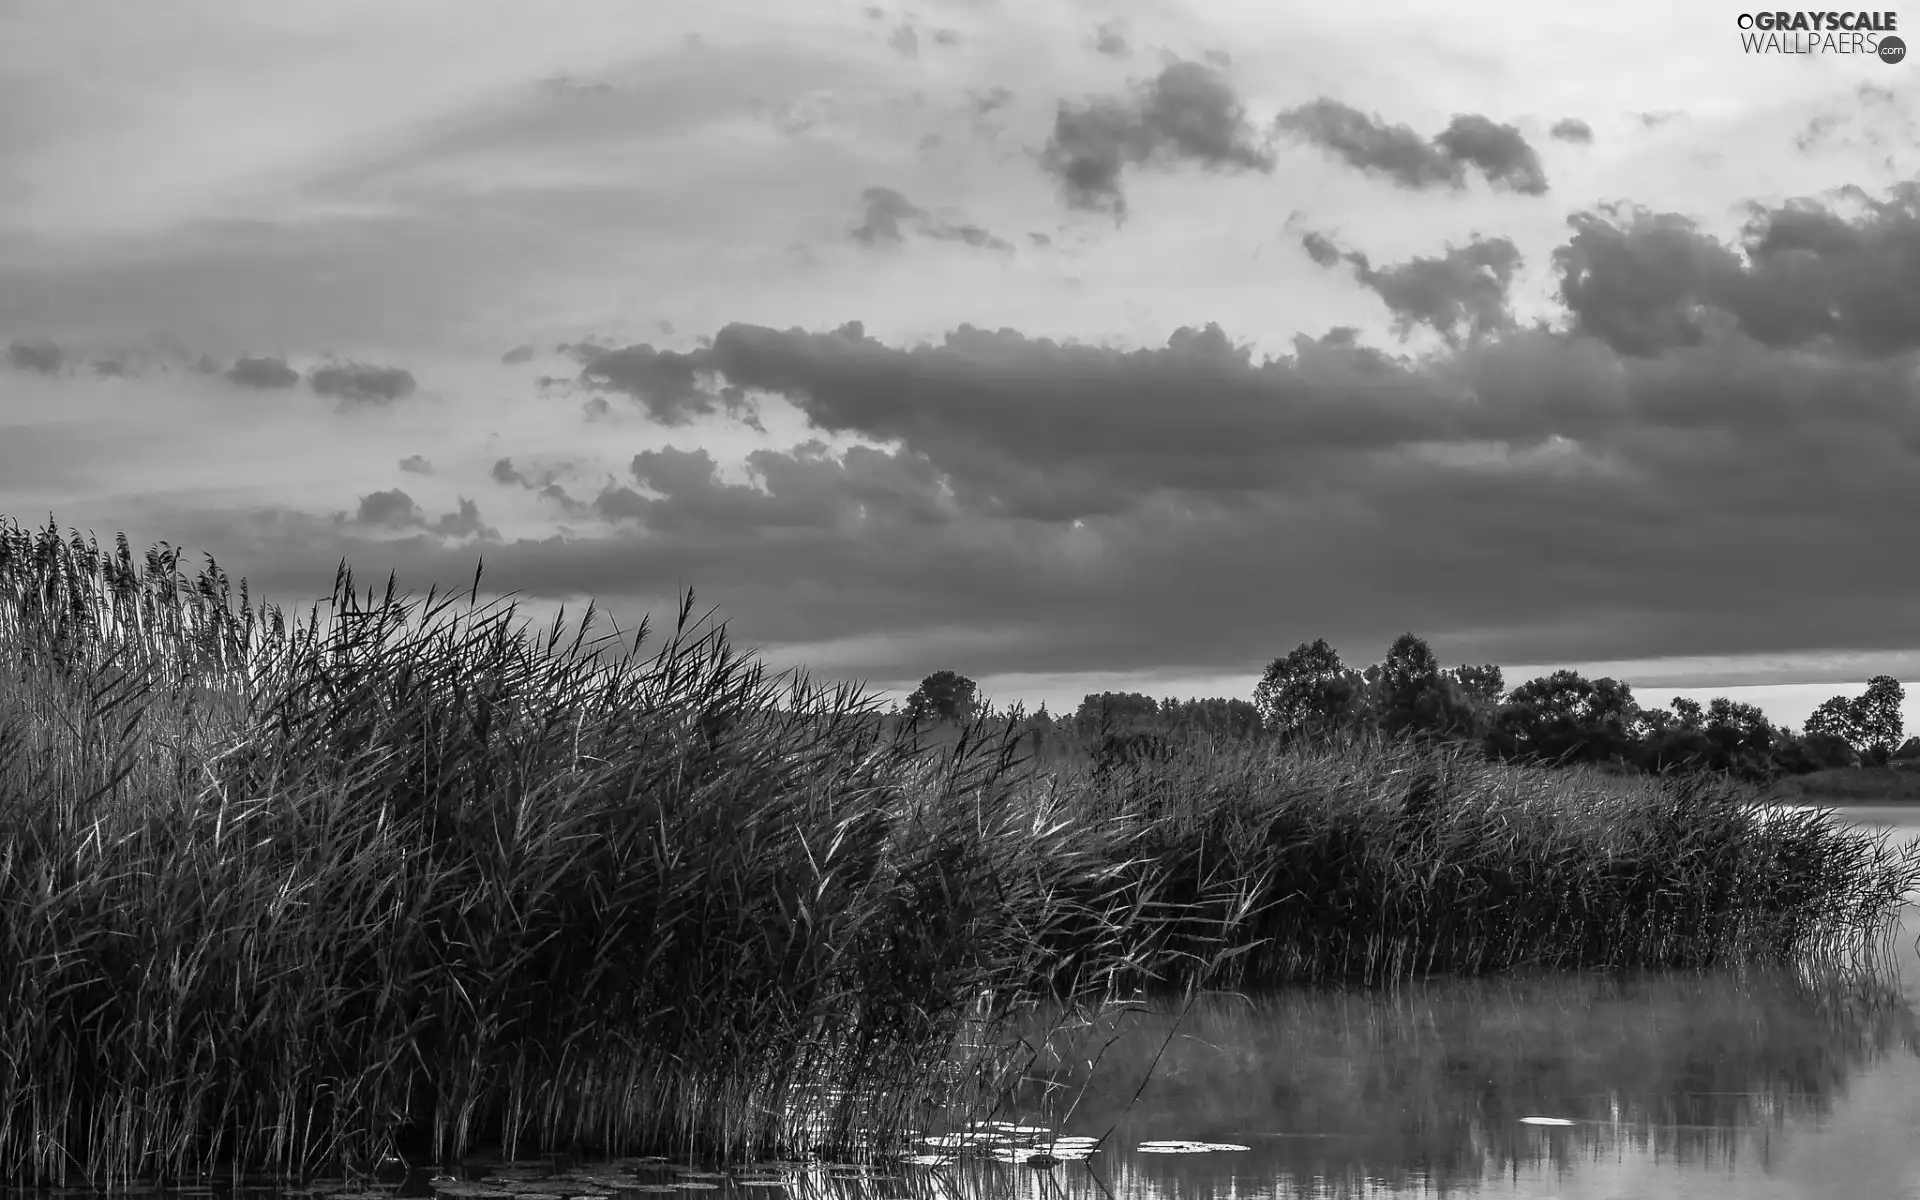 viewes, clouds, rushes, trees, lake